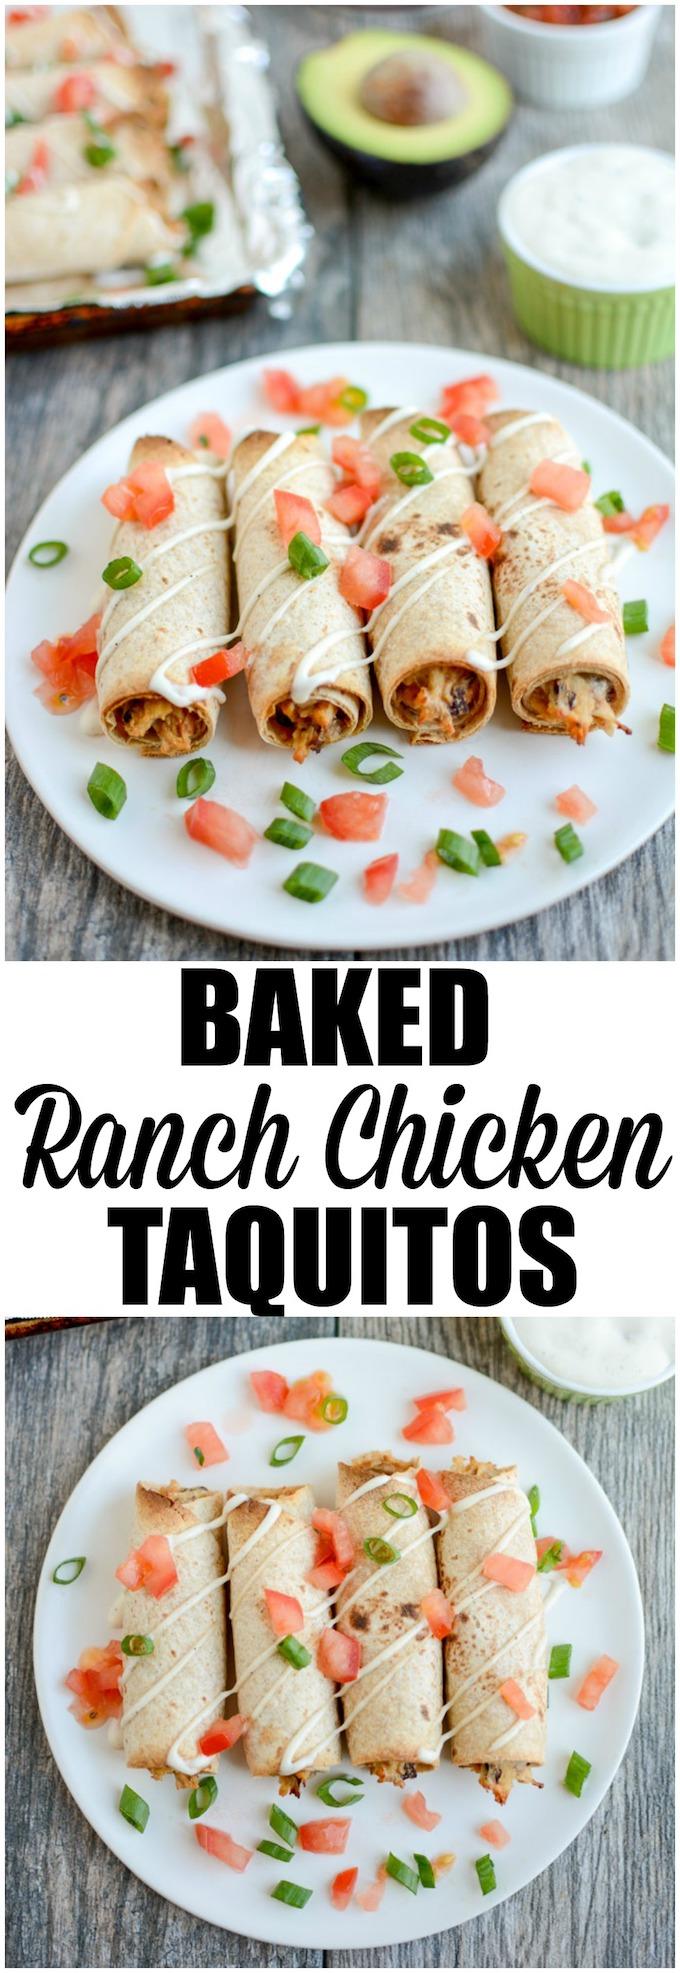 These Baked Ranch Chicken Taquitos are a quick and easy, kid-friendly option for lunch or dinner and a great way to use up leftover chicken. Make a double batch and freeze some for a busy week!